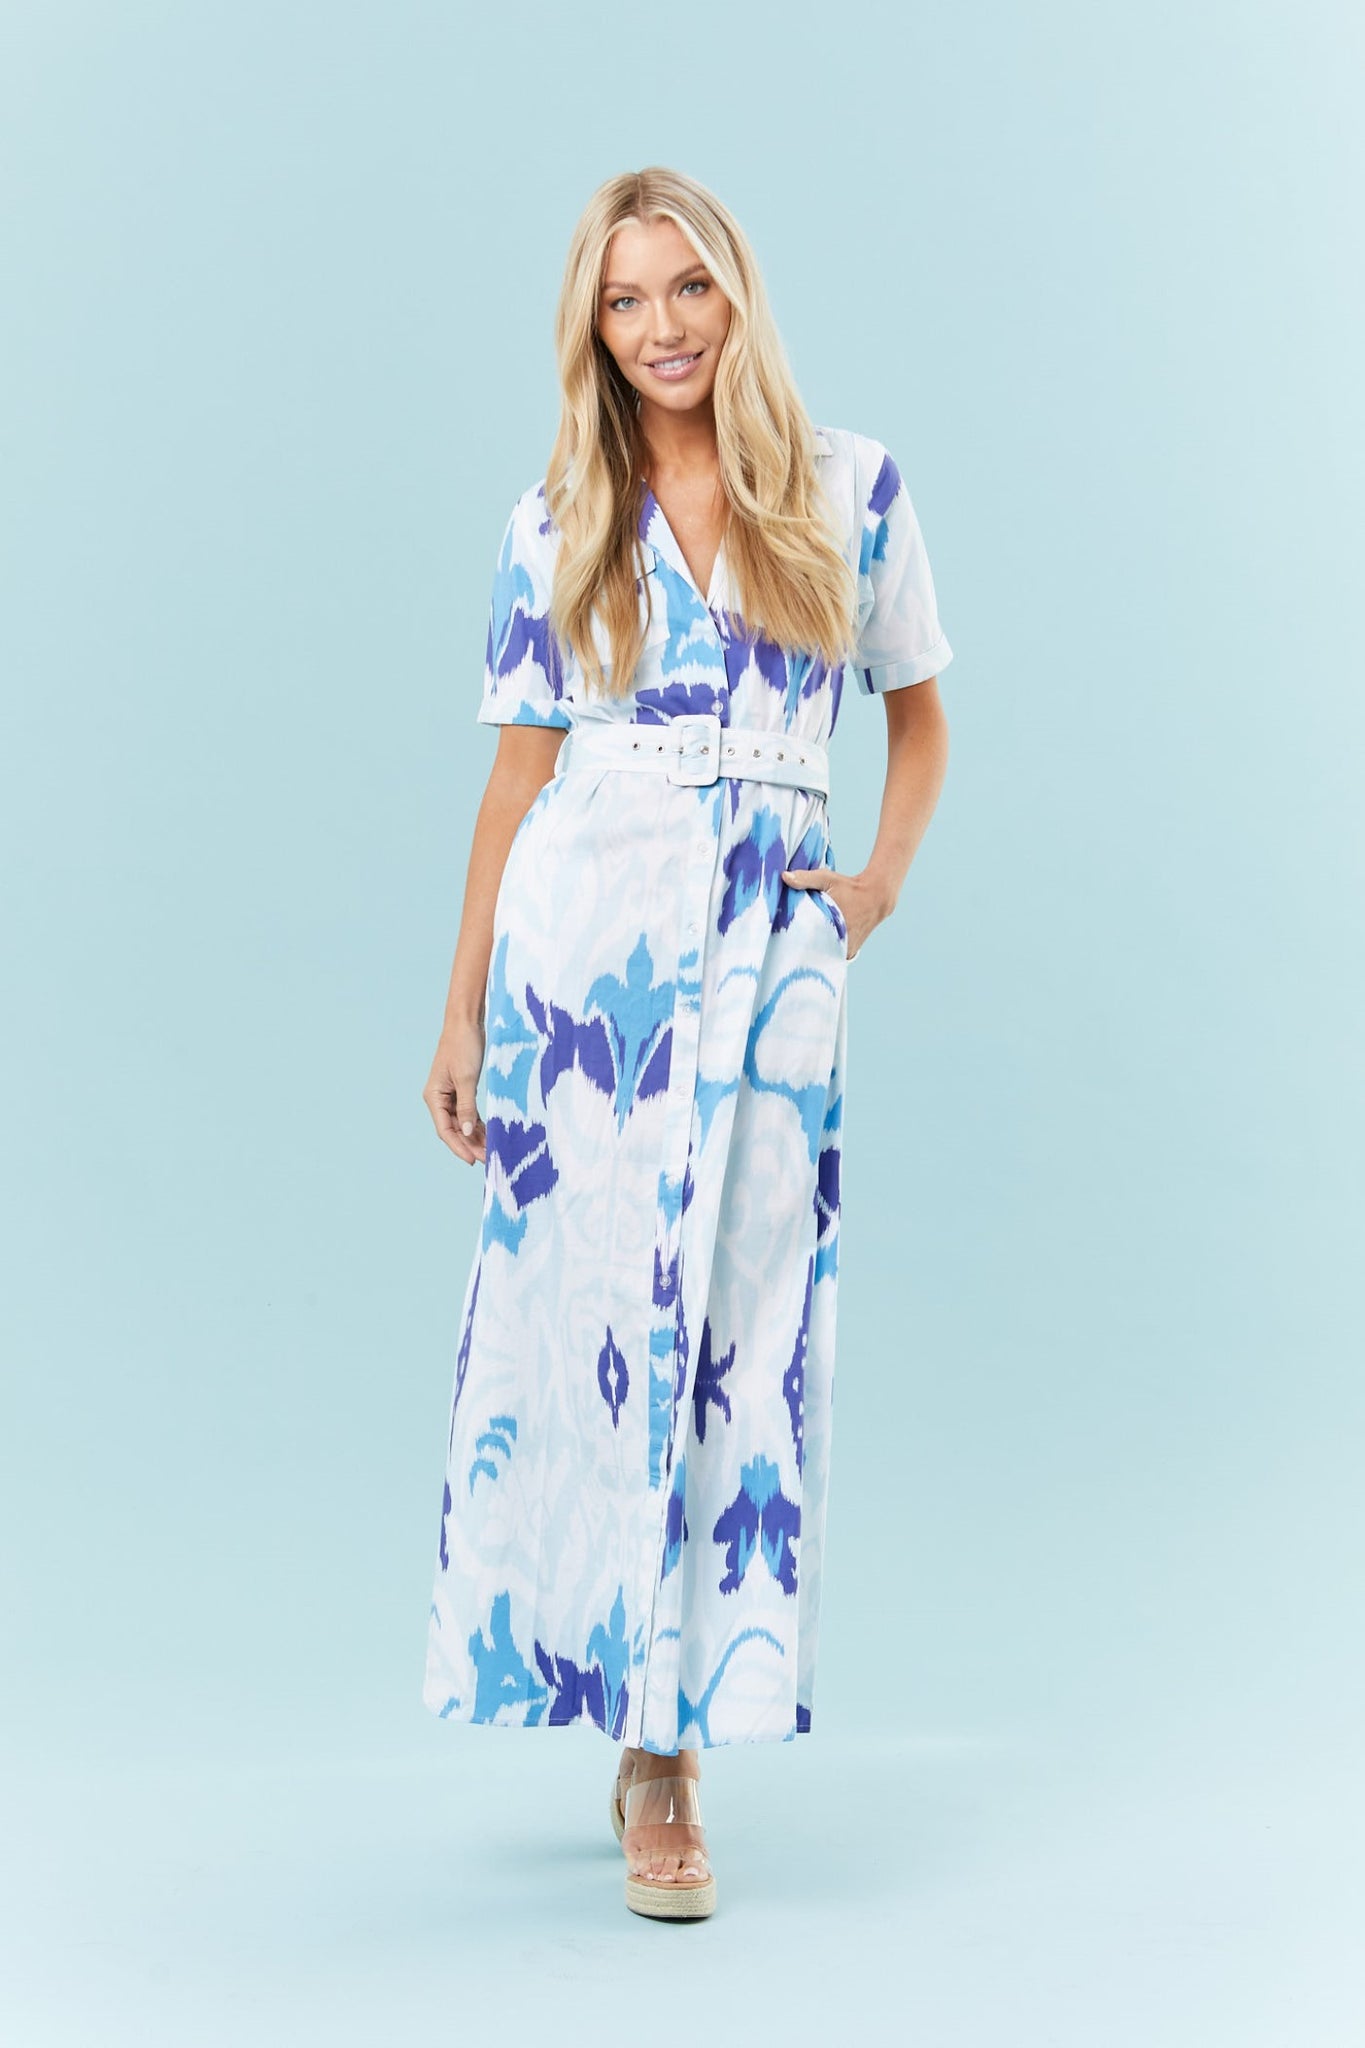 Haskell Dress in Tulip Ikat White + Blues